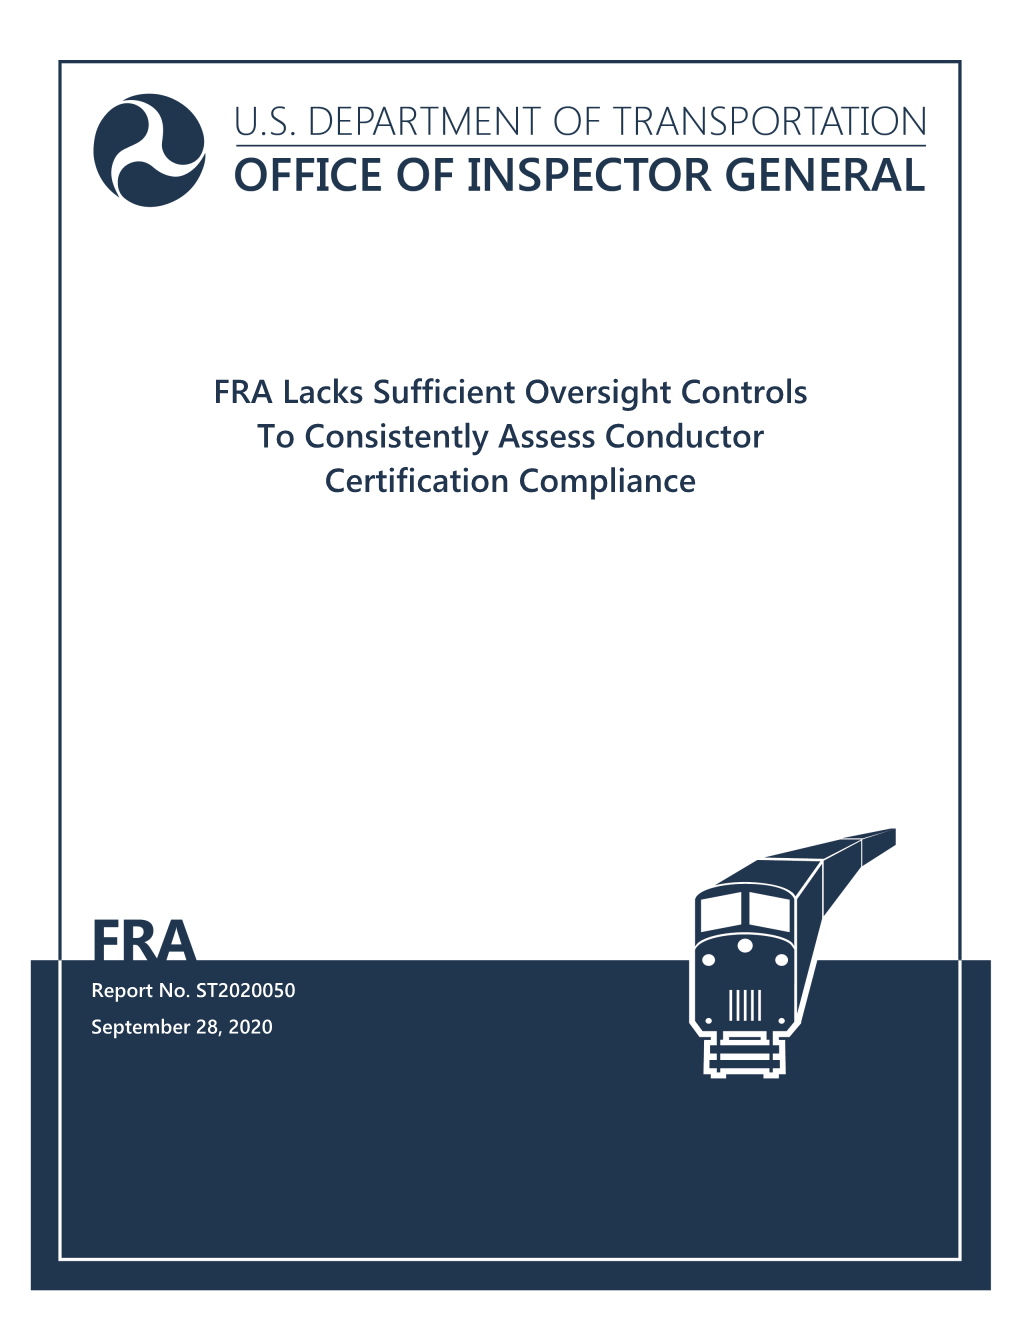 Insufficient Controls Hinder FRA's Oversight of Conductor Certification Compliance